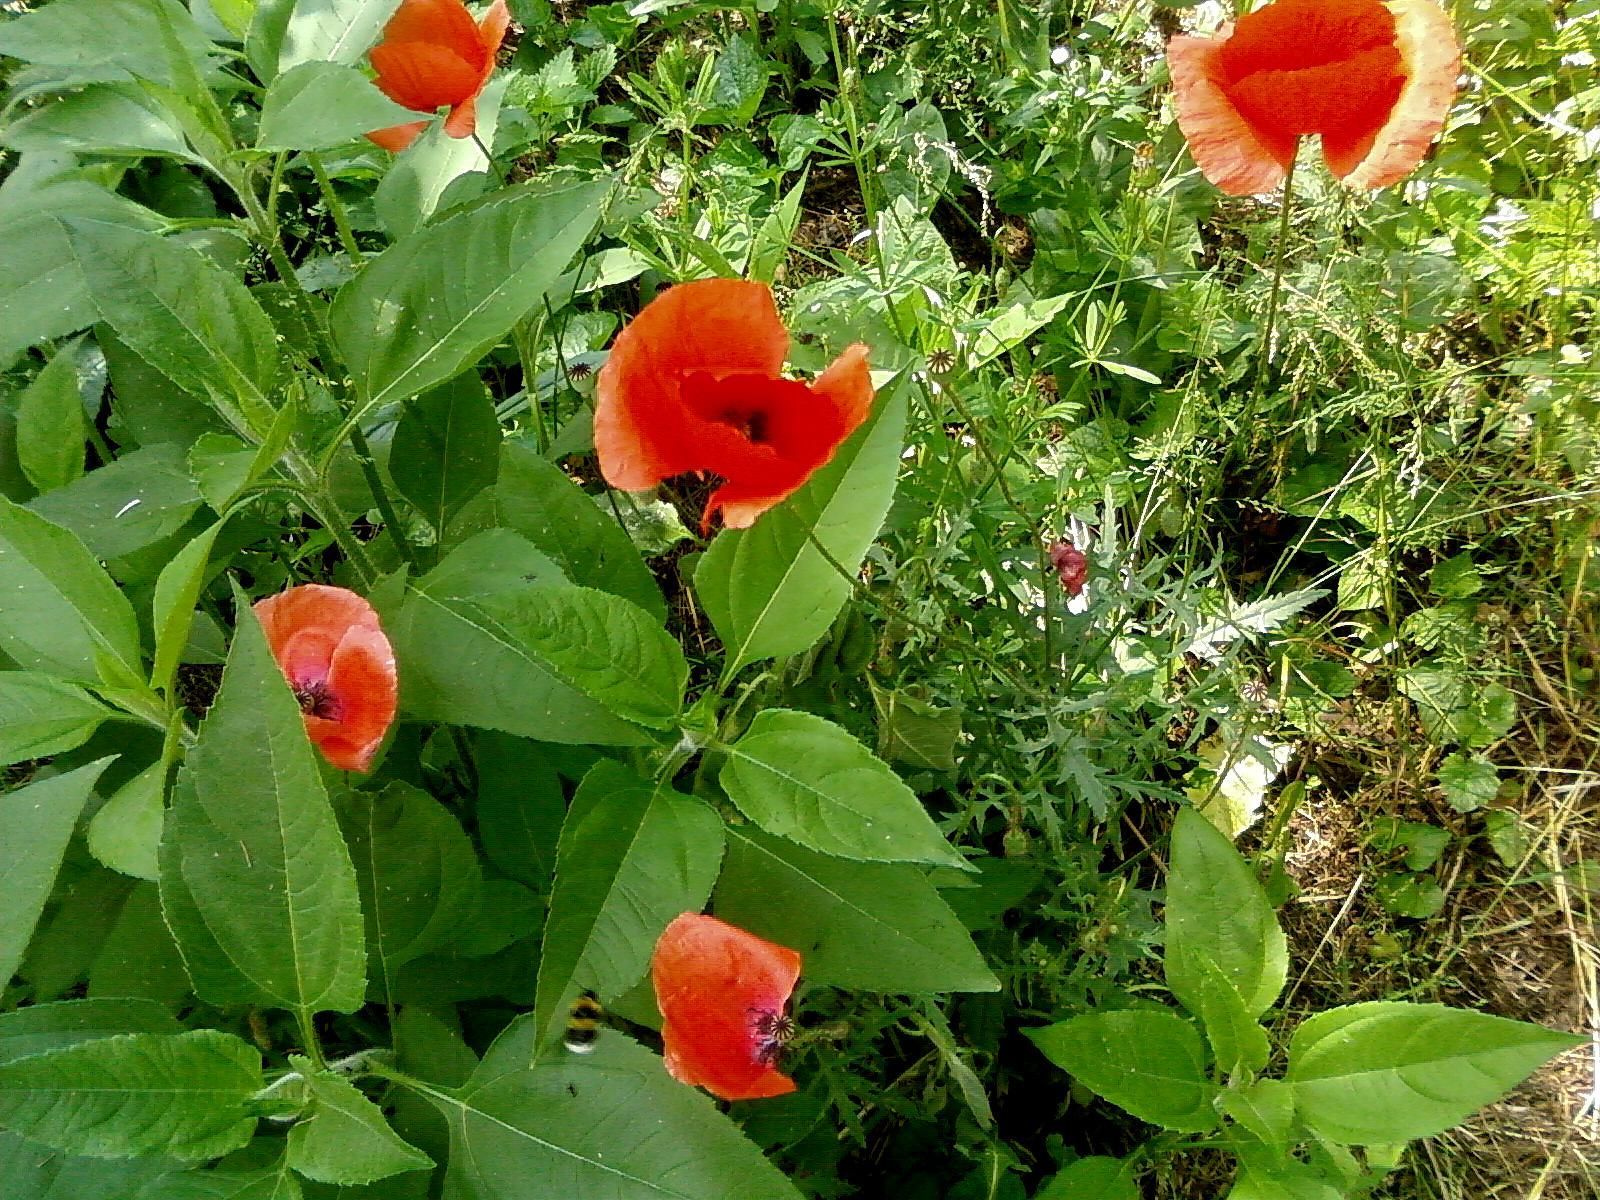 File:Close up red wild poppy flowers.jpg - Wikimedia Commons